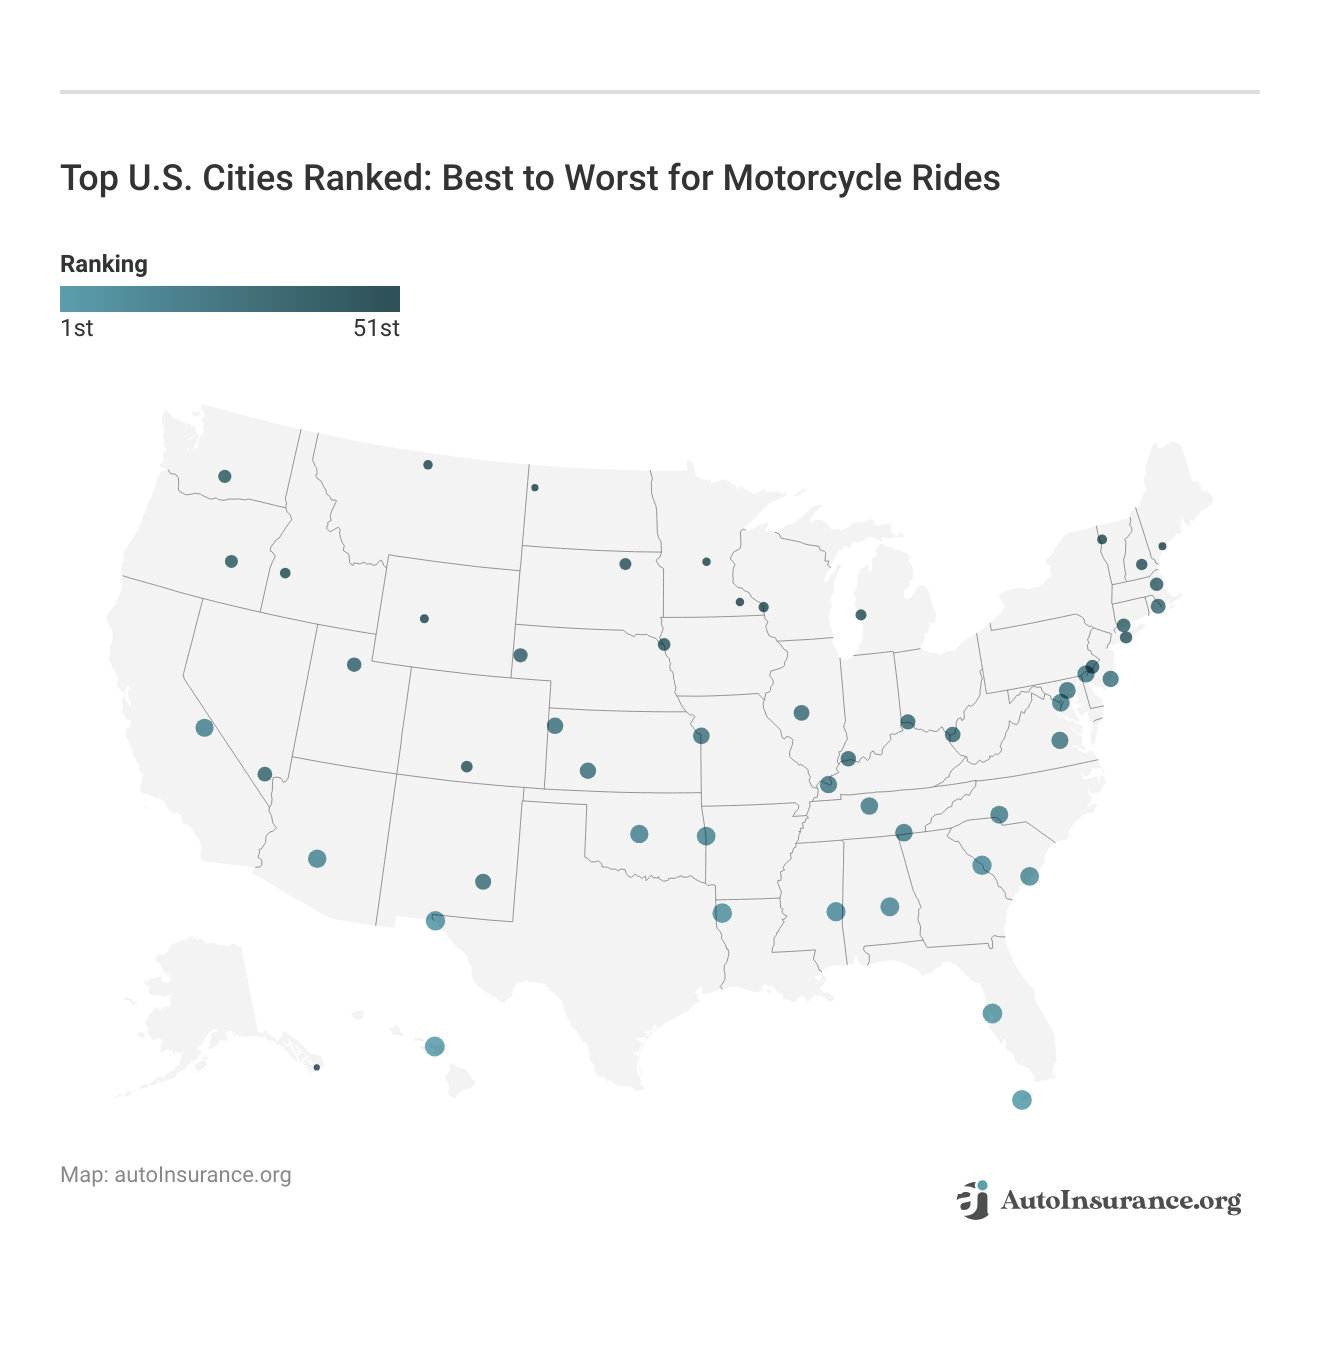 <h3>Top U.S. Cities Ranked: Best to Worst for Motorcycle Rides</h3>